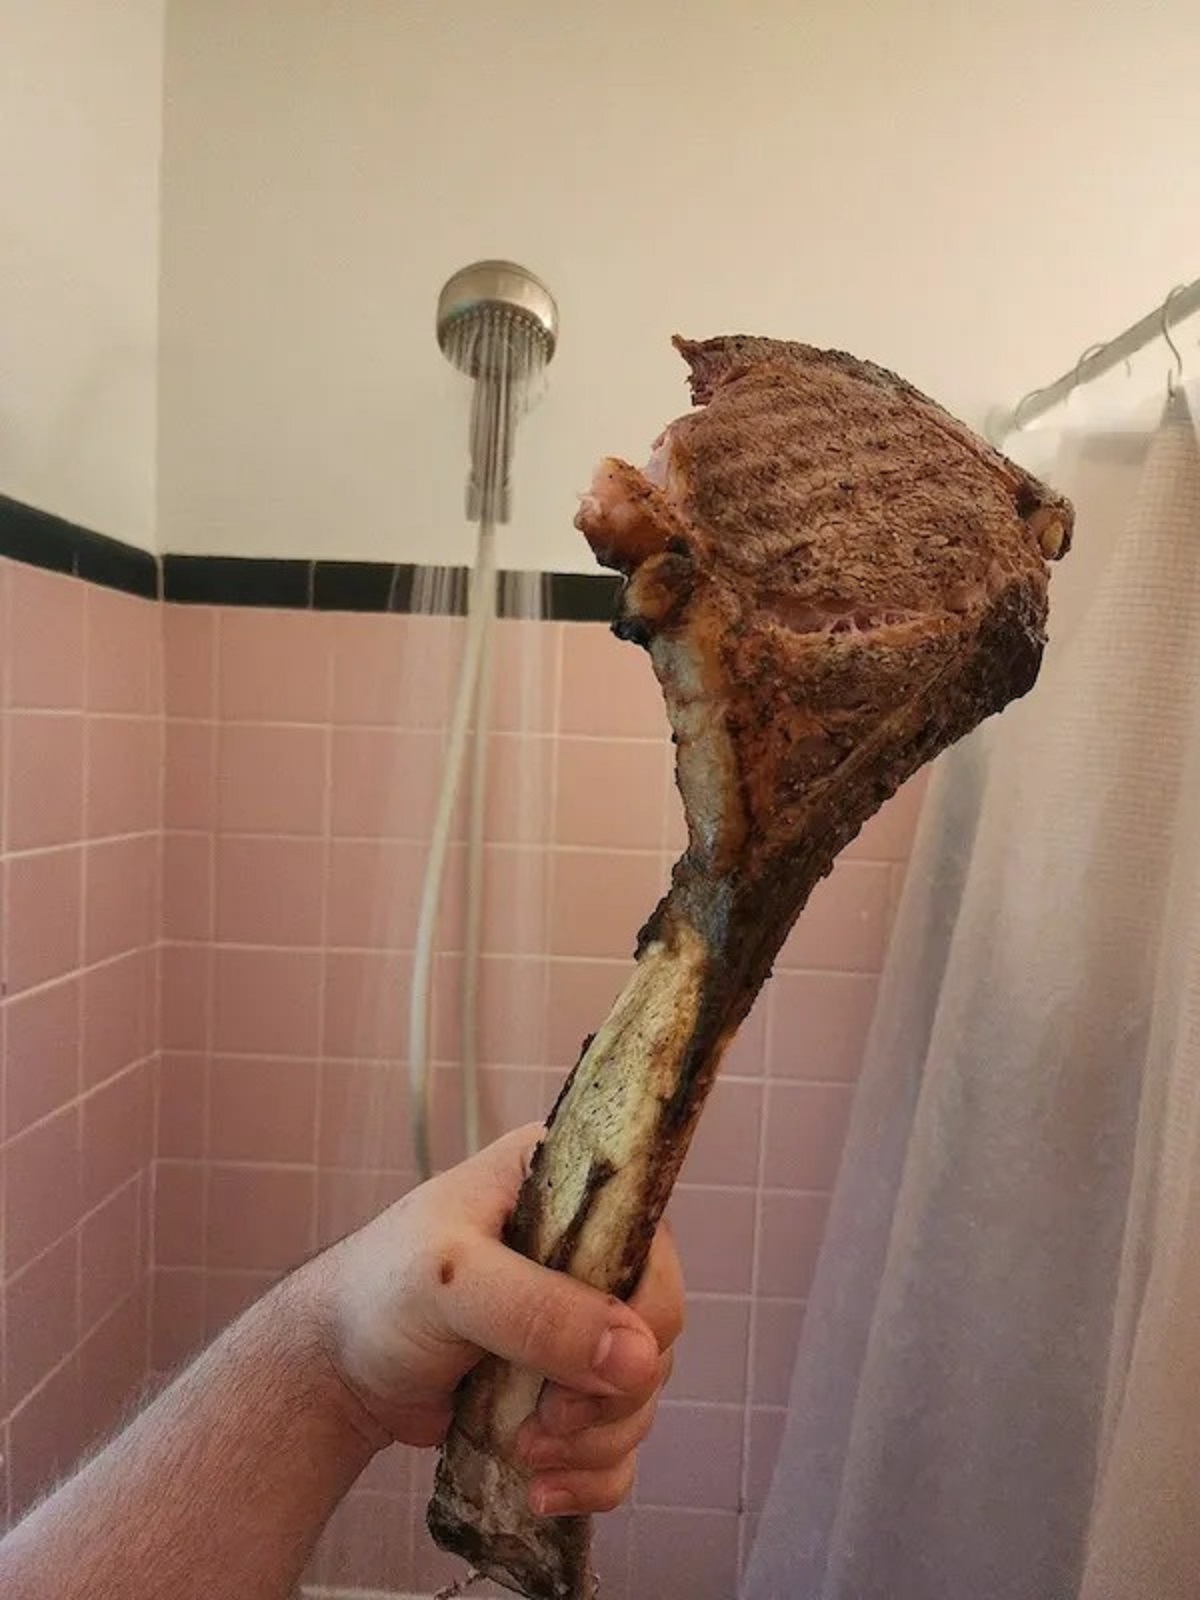 shower food review guy